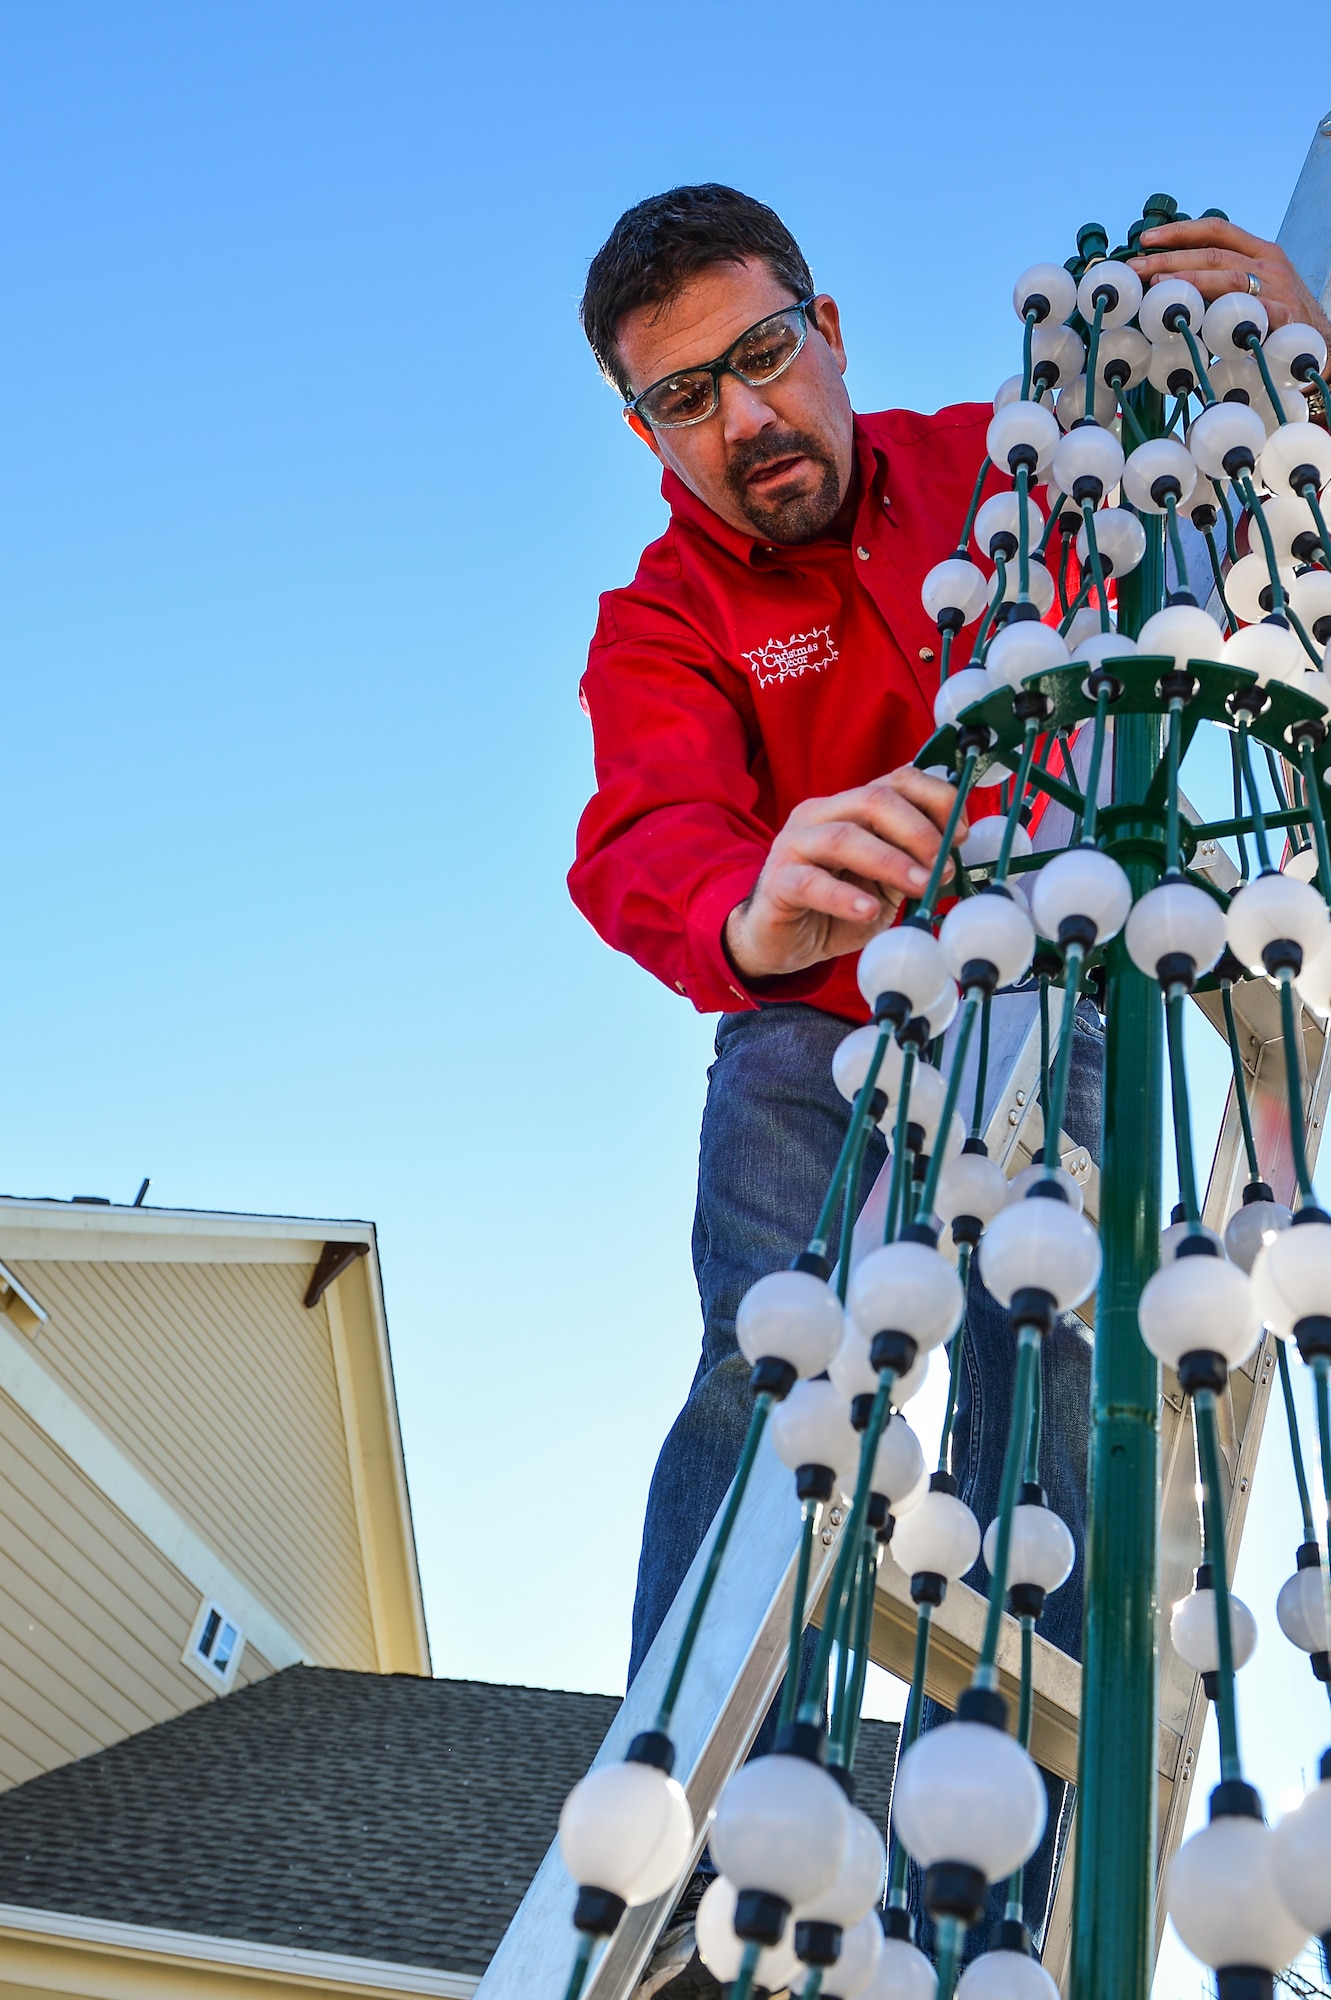 Blake Smith, Christmas Decor by Swingle Lawn, Tree & Landscape Care, assembles a lighted tree decoration Nov. 29, 2013, in family housing on Buckley Air Force Base, Colo. Maj. Matthew Anderson, 460th Civil Engineer Squadron, and his family applied and were selected for the Decorated Family Program which provided lights, wreaths other ornaments applied by a professional decorating team to military members and families. (U.S. Air Force photo by Senior Airman Riley Johnson/Released)